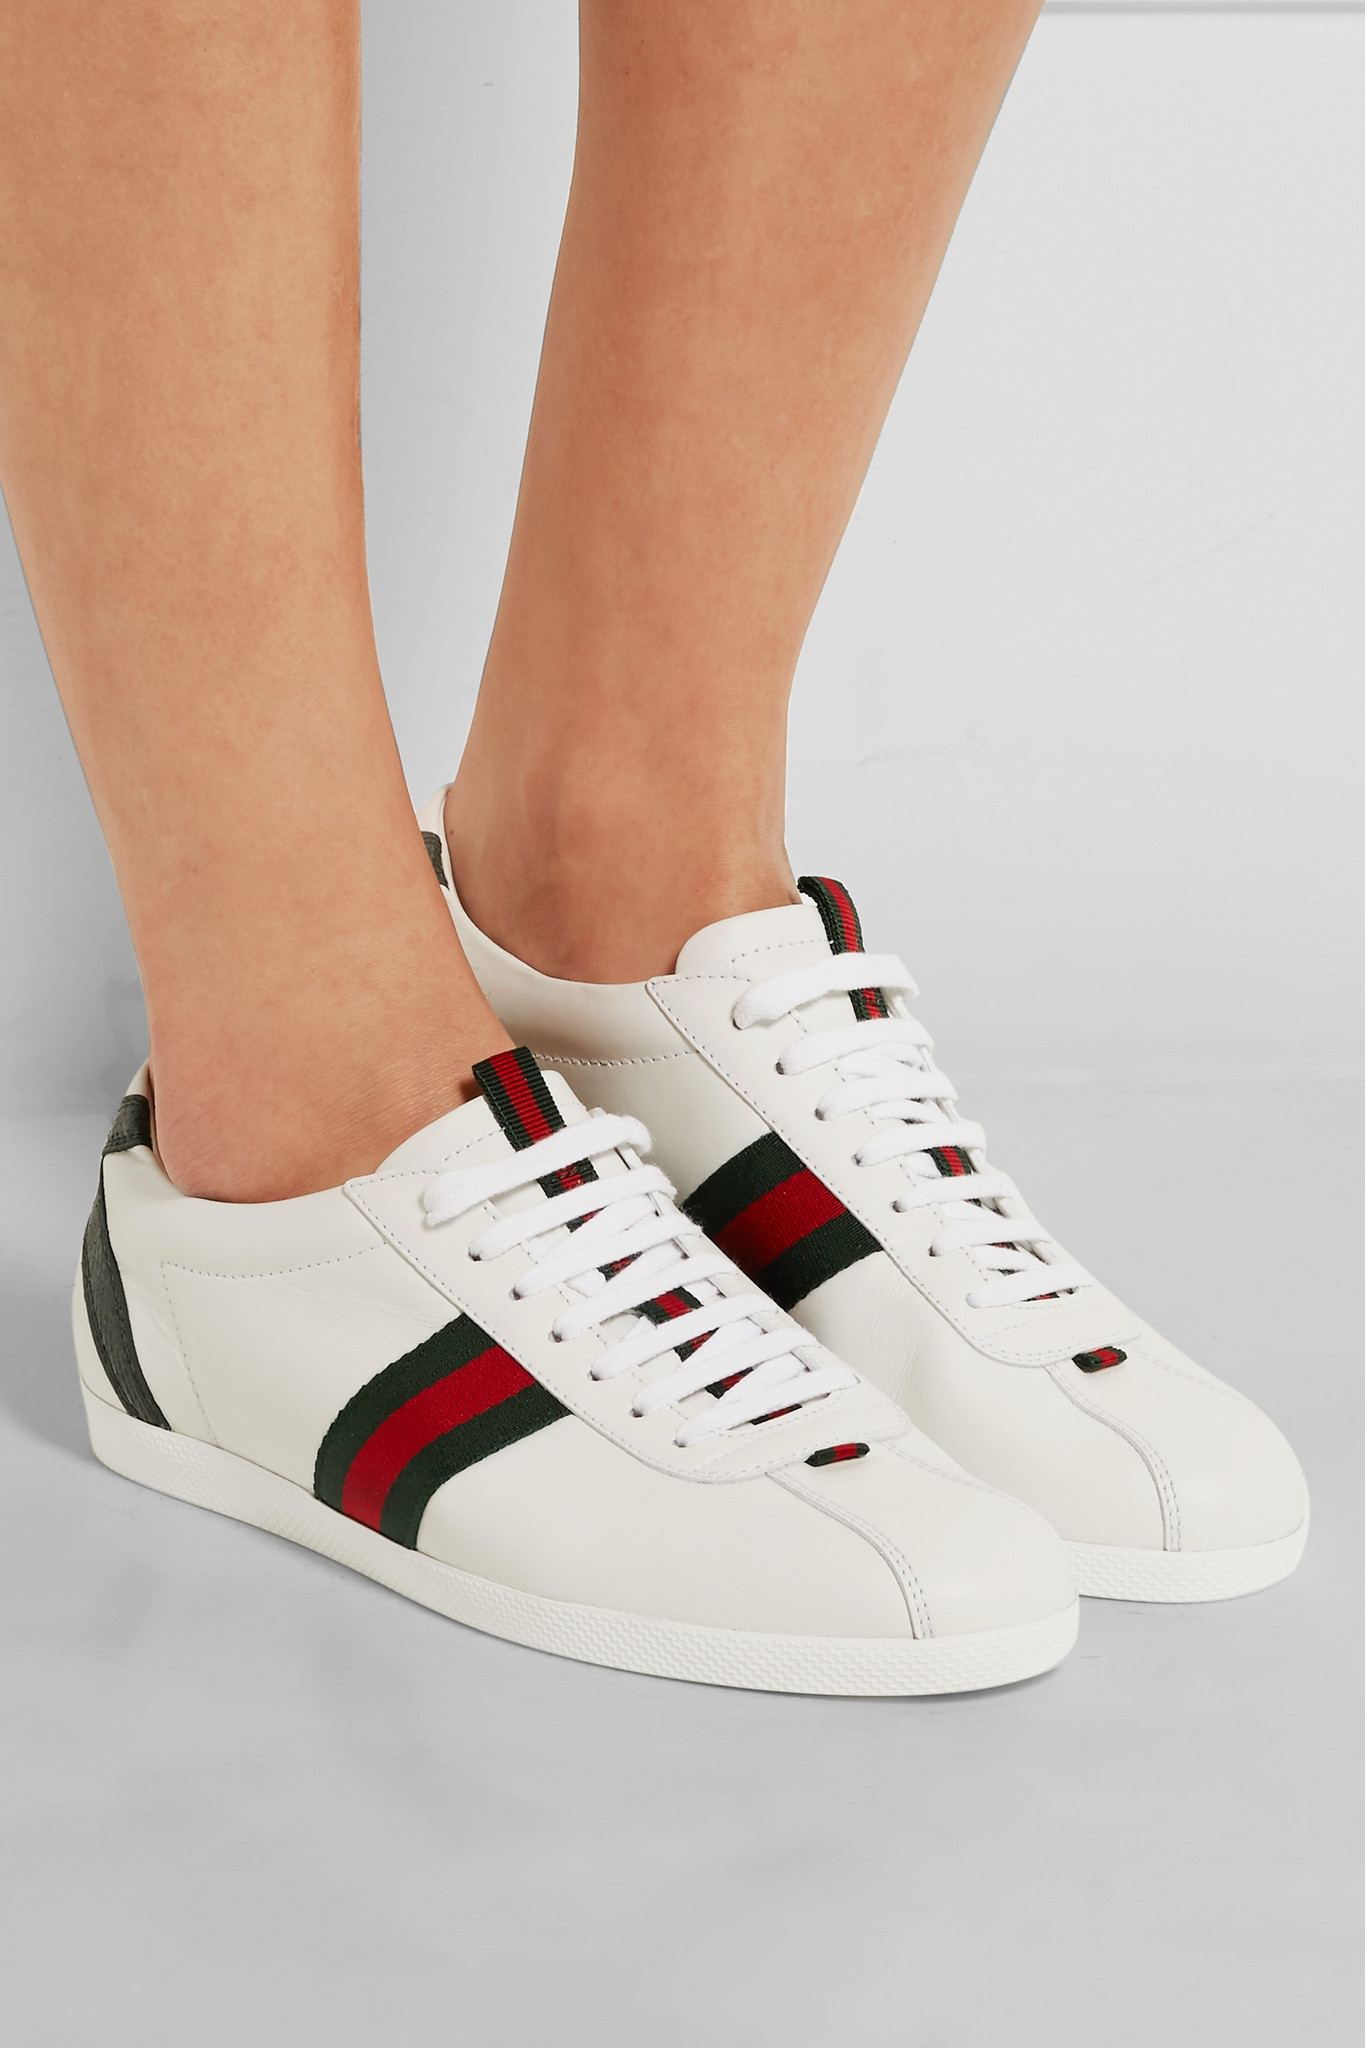 Lyst - Gucci New Ace Watersnake-trimmed Leather Sneakers in White